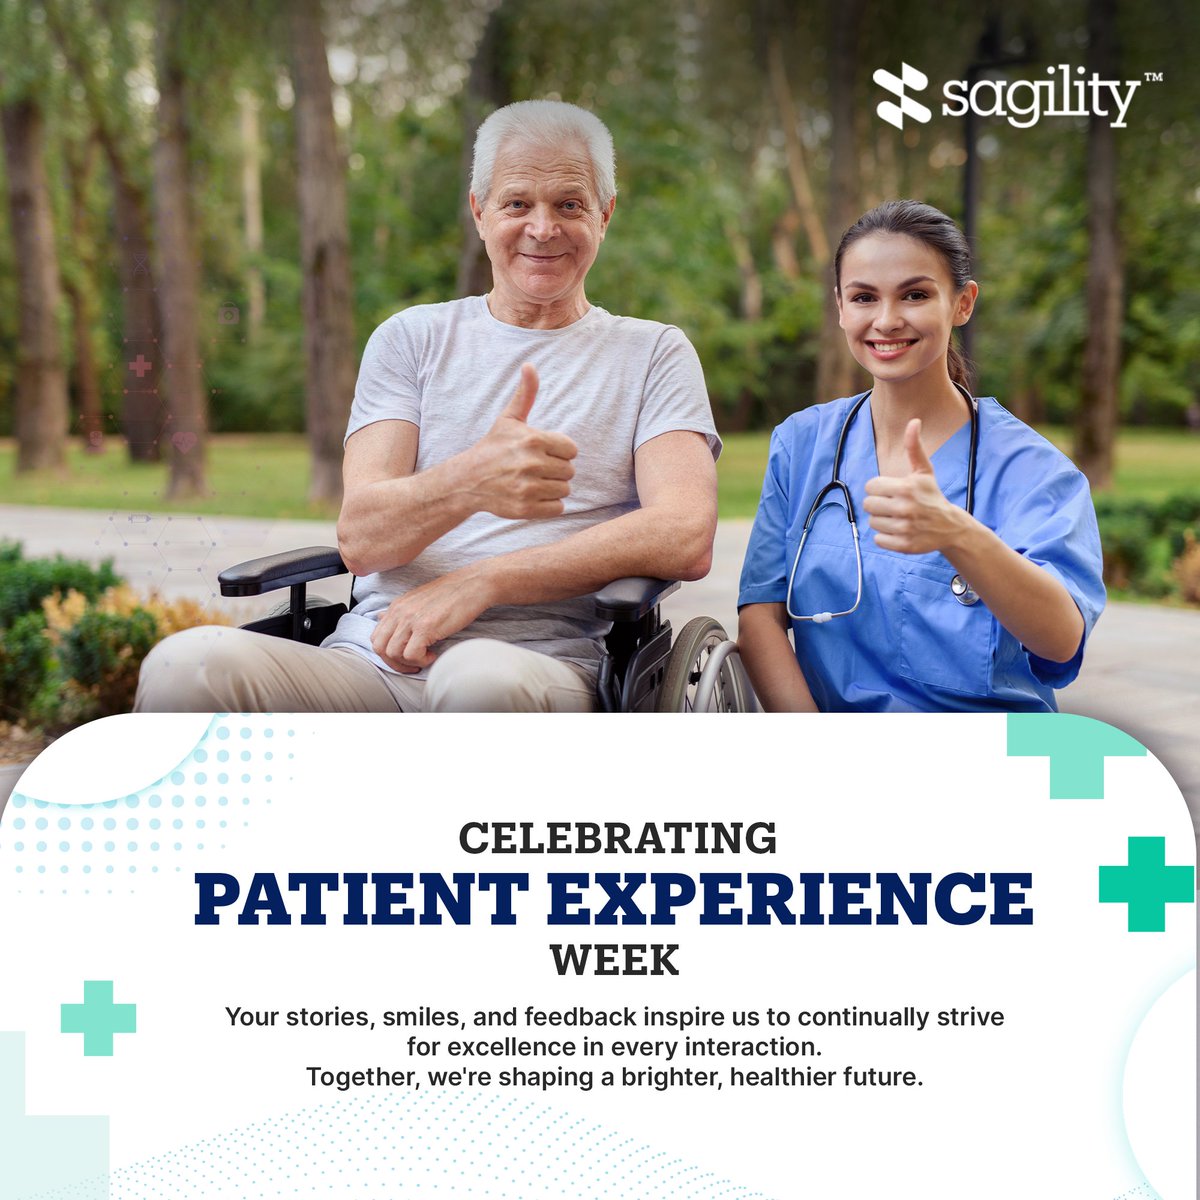 Let's celebrate Patient Experience Week and honor the incredible patients who inspire us every day. Let's join hands and make a commitment to continue putting patients first, always.​
​
#Sagility #WeAreSagility #SOARWithSagility #PatientExperienceWeek #PatientsFirst